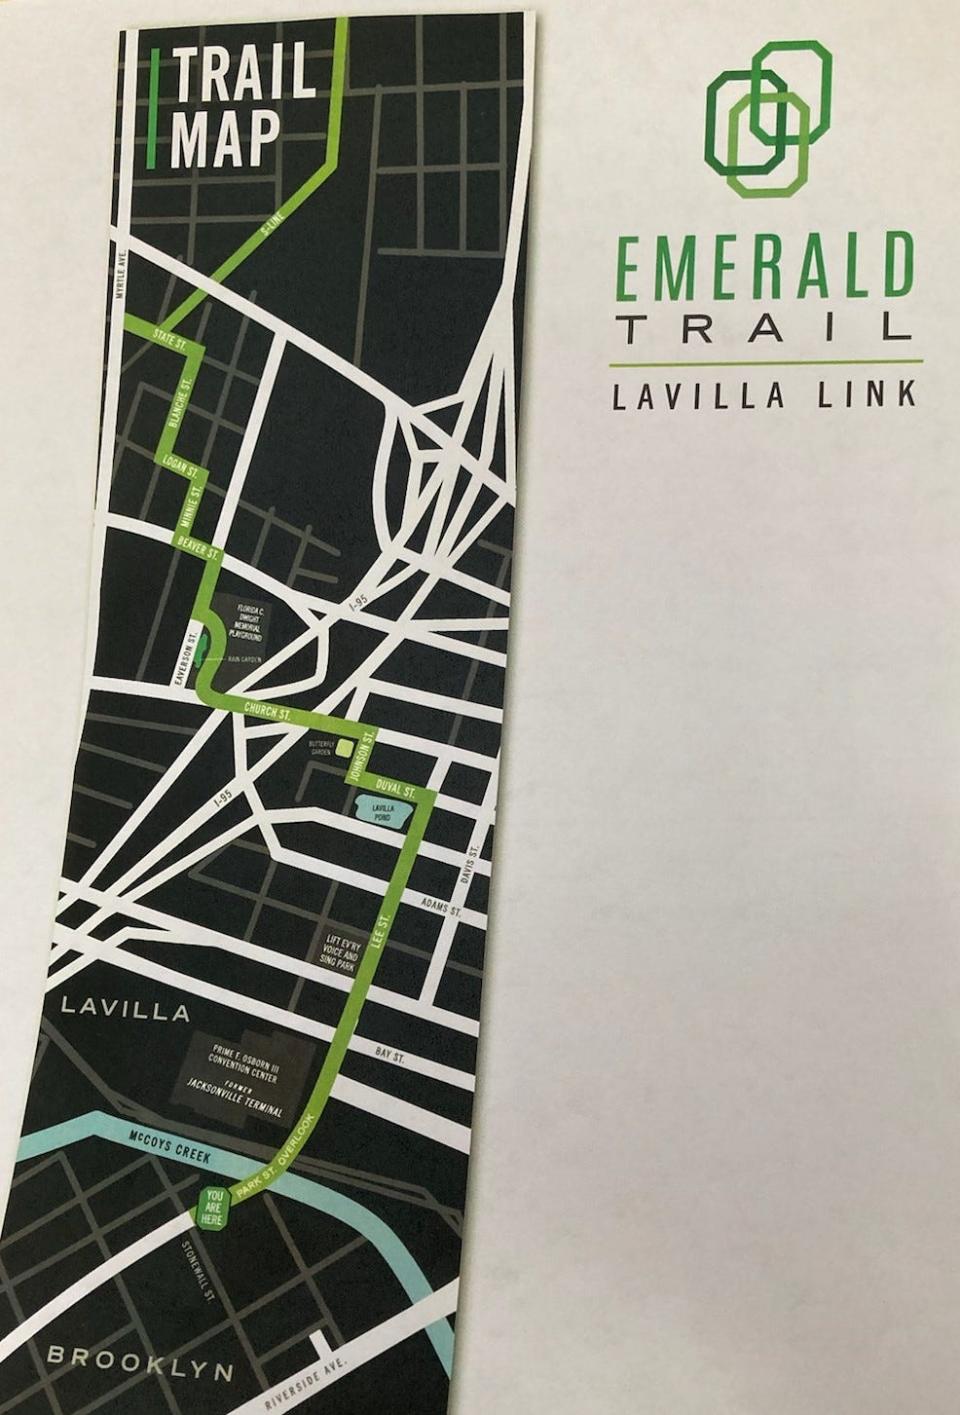 Groundwork Jacksonville's map of the Emerald Trail's LaVilla Link